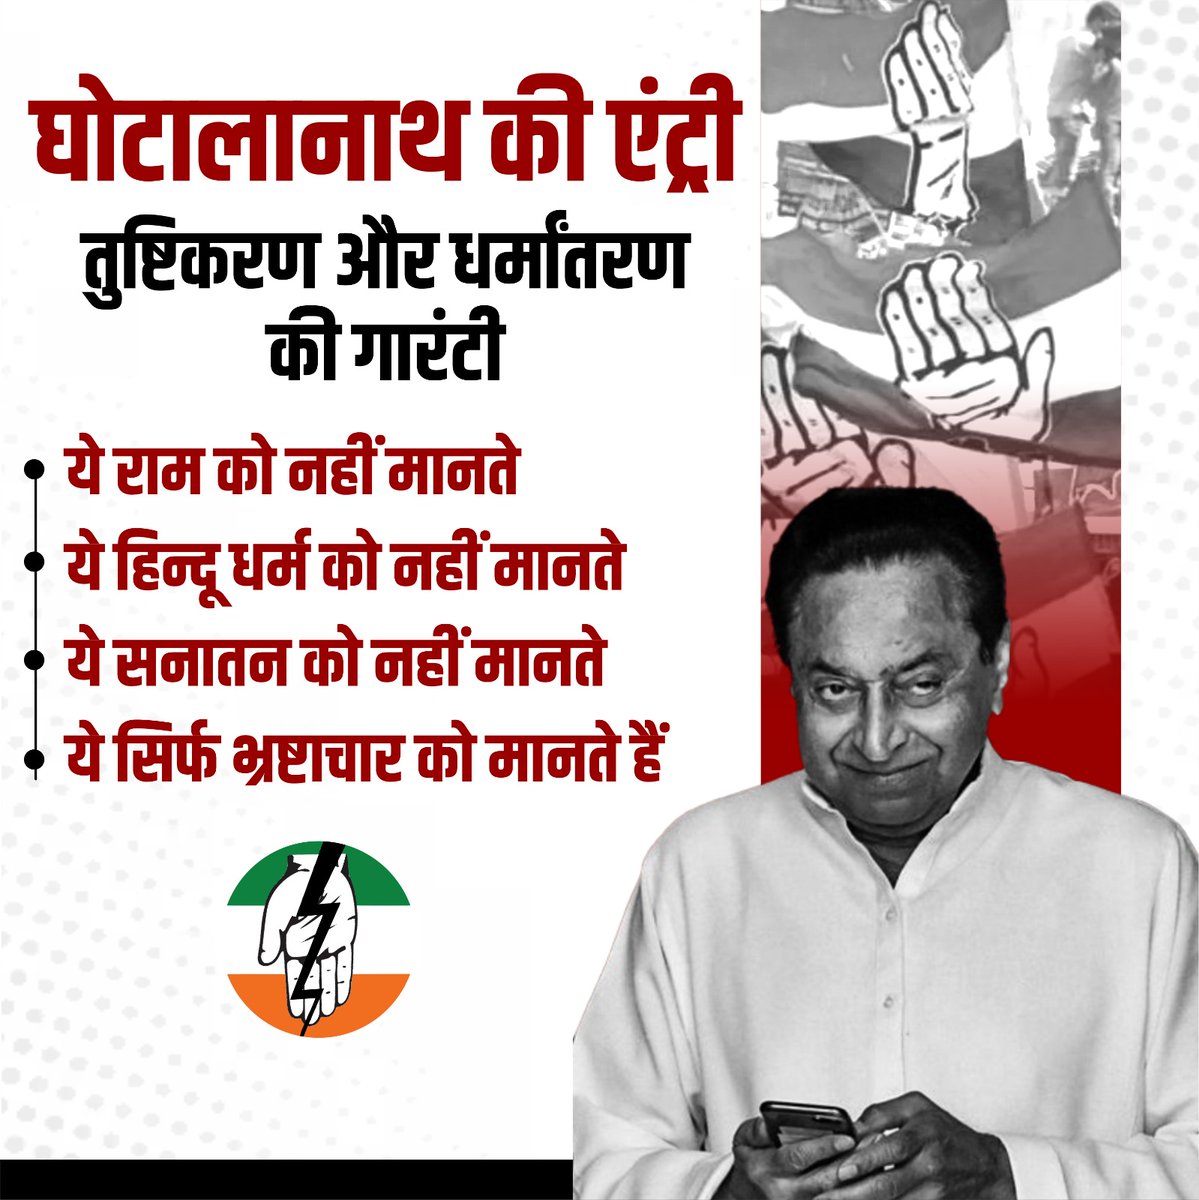 Congress has always cheated the people of the country in the name of religion.
 #धर्मांतरण_की_गारंटी